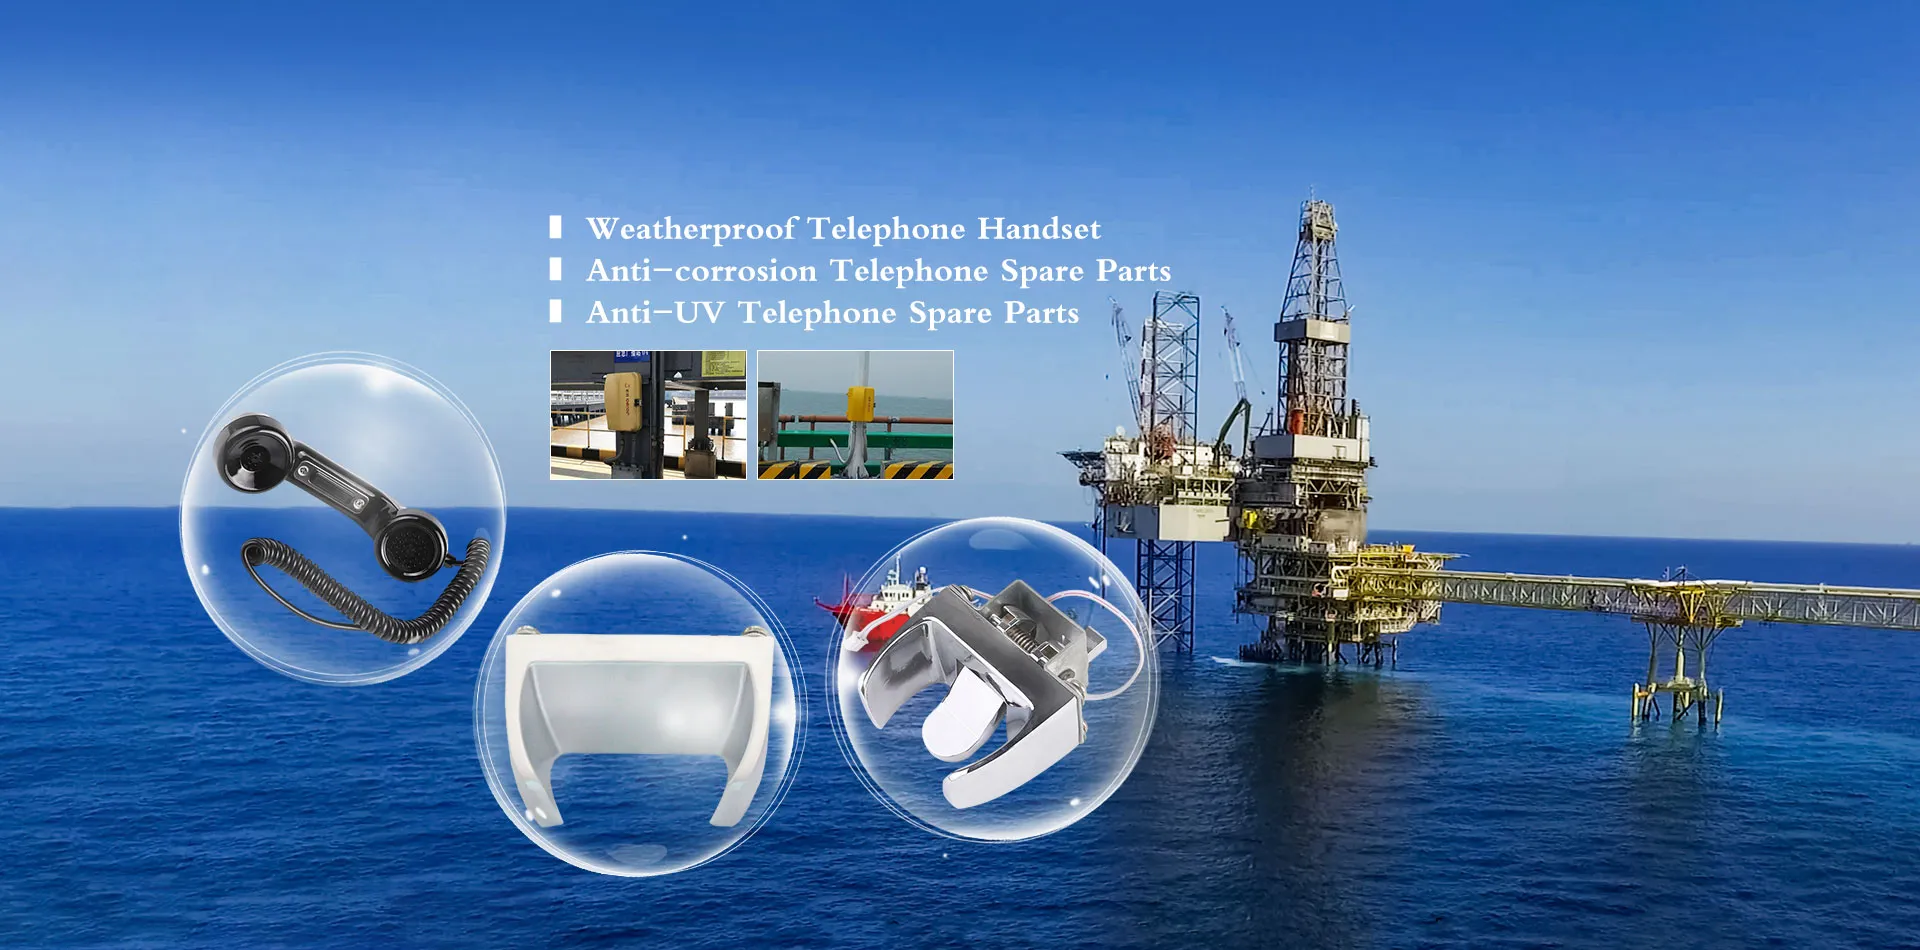 Telephone Handset Manufacturers and Suppliers